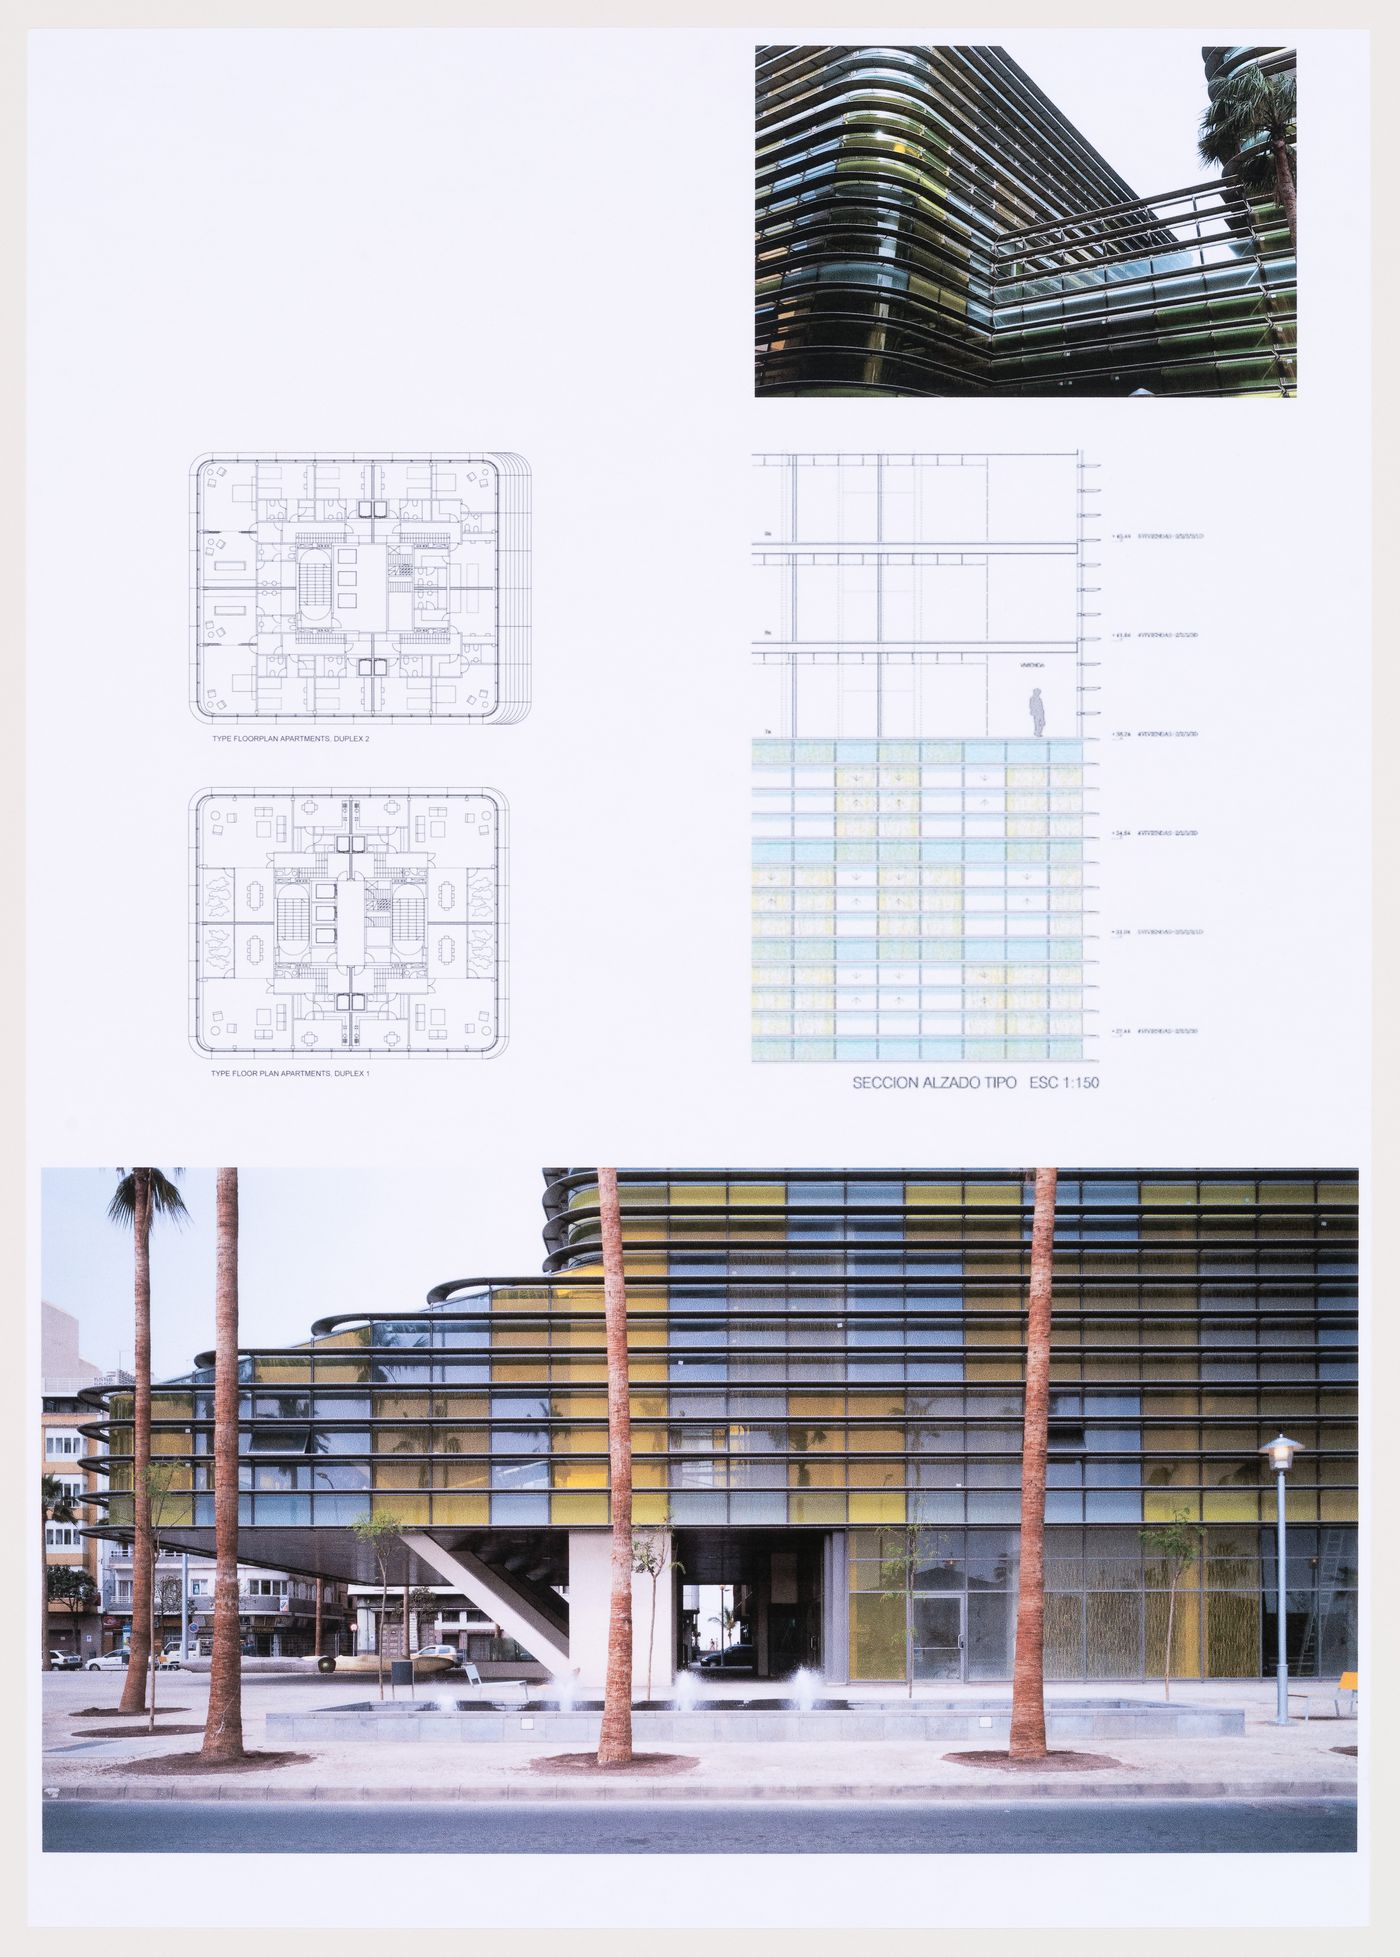 Plans and partial views of the tower, Plaza y torre Woermann, Las Palmas, Canary Islands